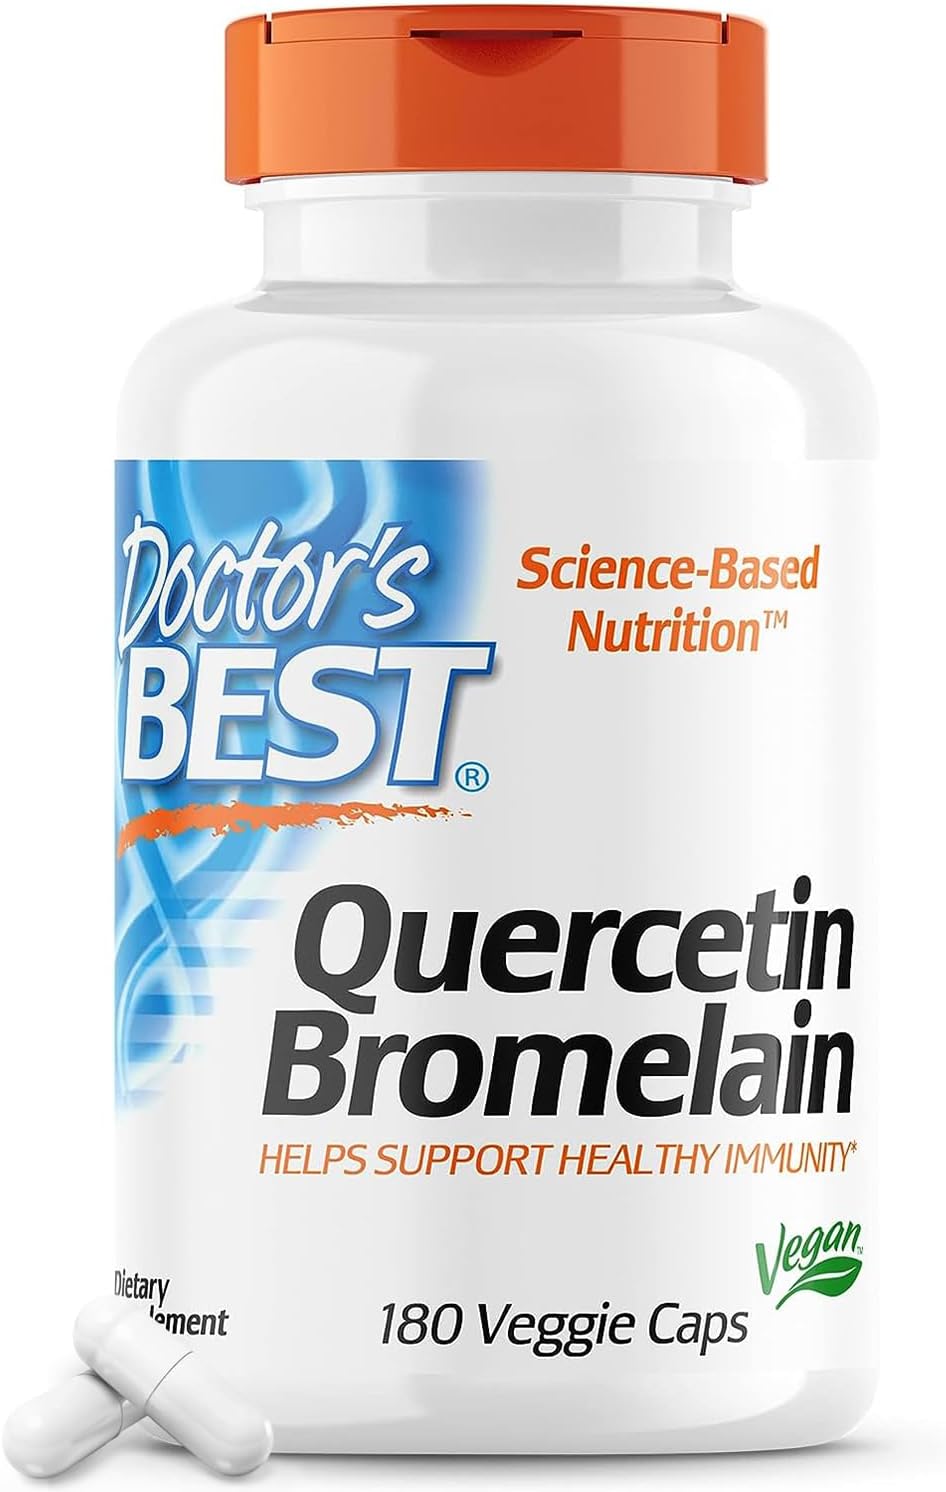 Doctors Best Quercetin Bromelain, Immunity Support, Heart, Joint  Healthy Respiratory System, Non-GMO, Vegan, Gluten Free, Soy Free,180 VC